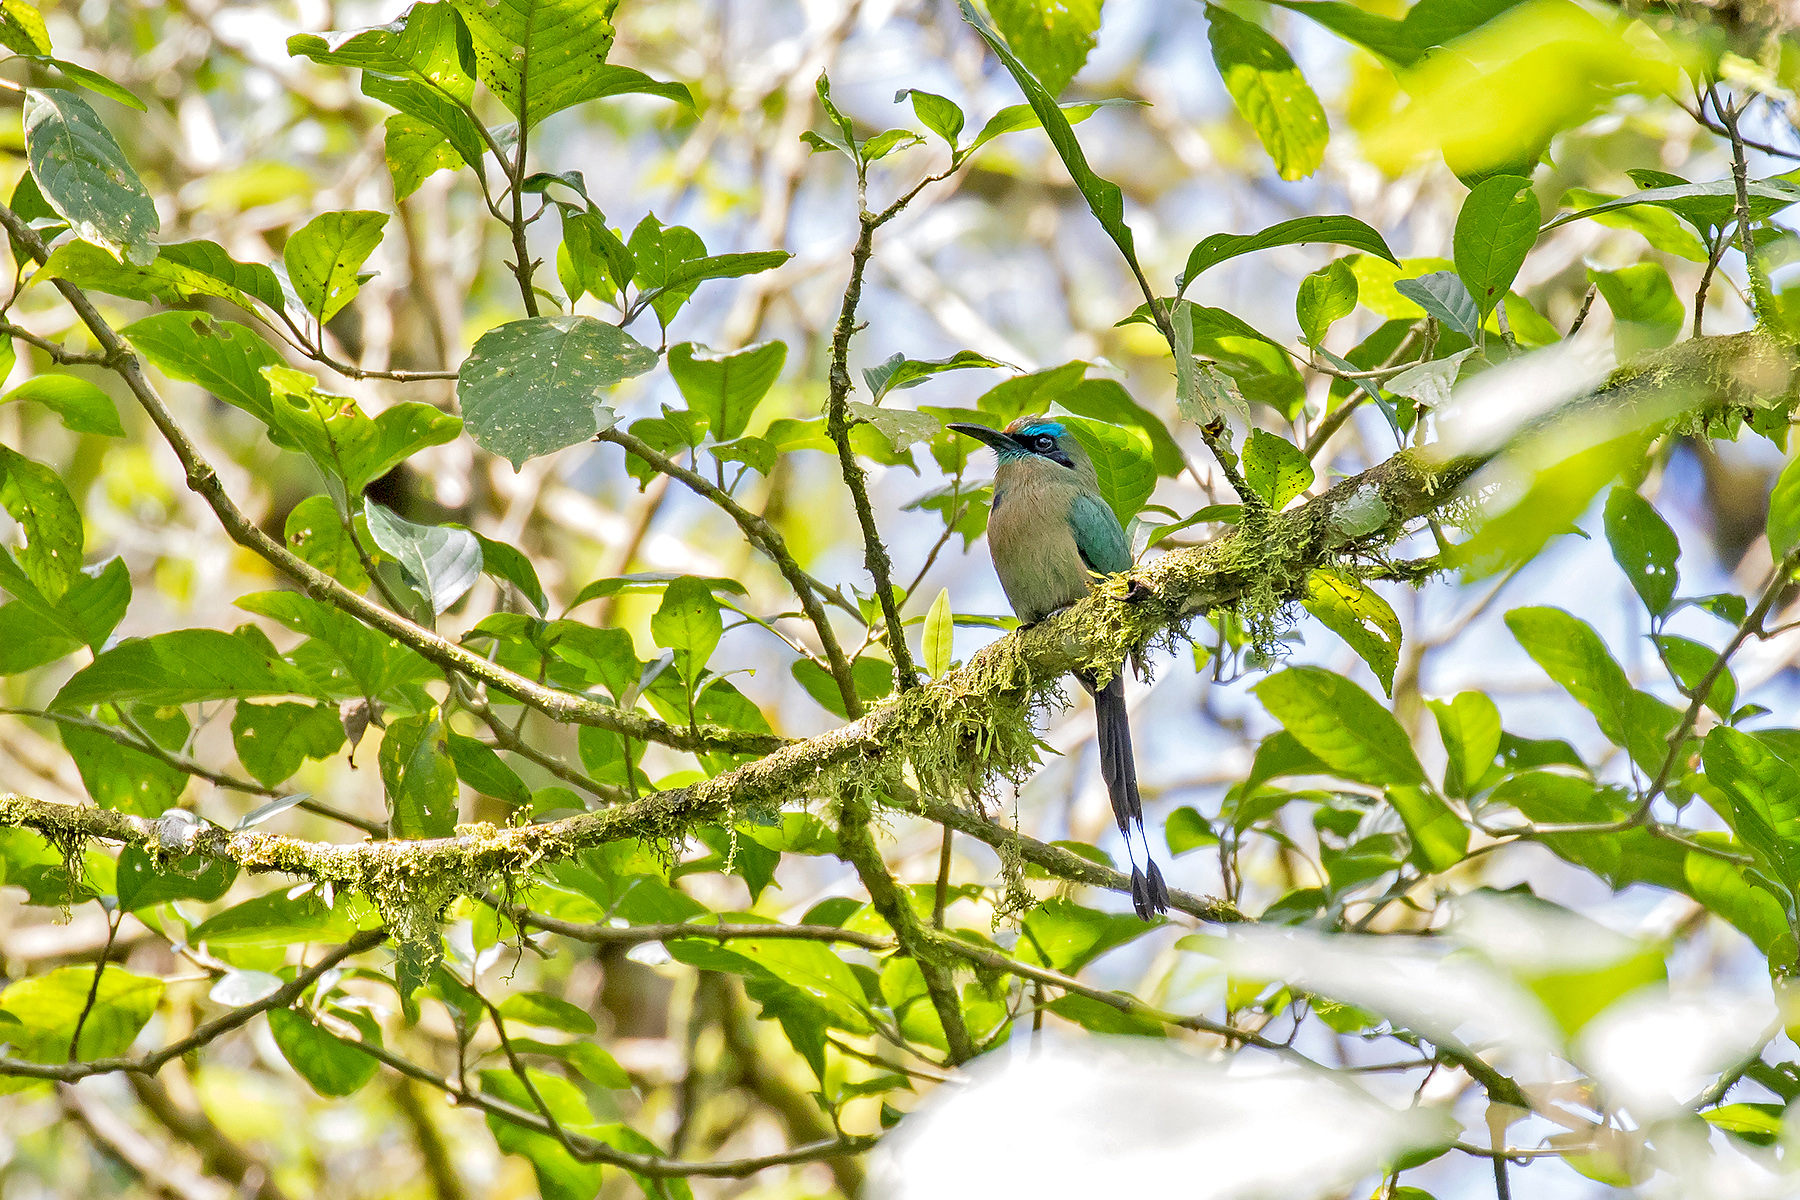 Keel-billed Motmot on our Costa Rica birding tour (image by Pete Morris)